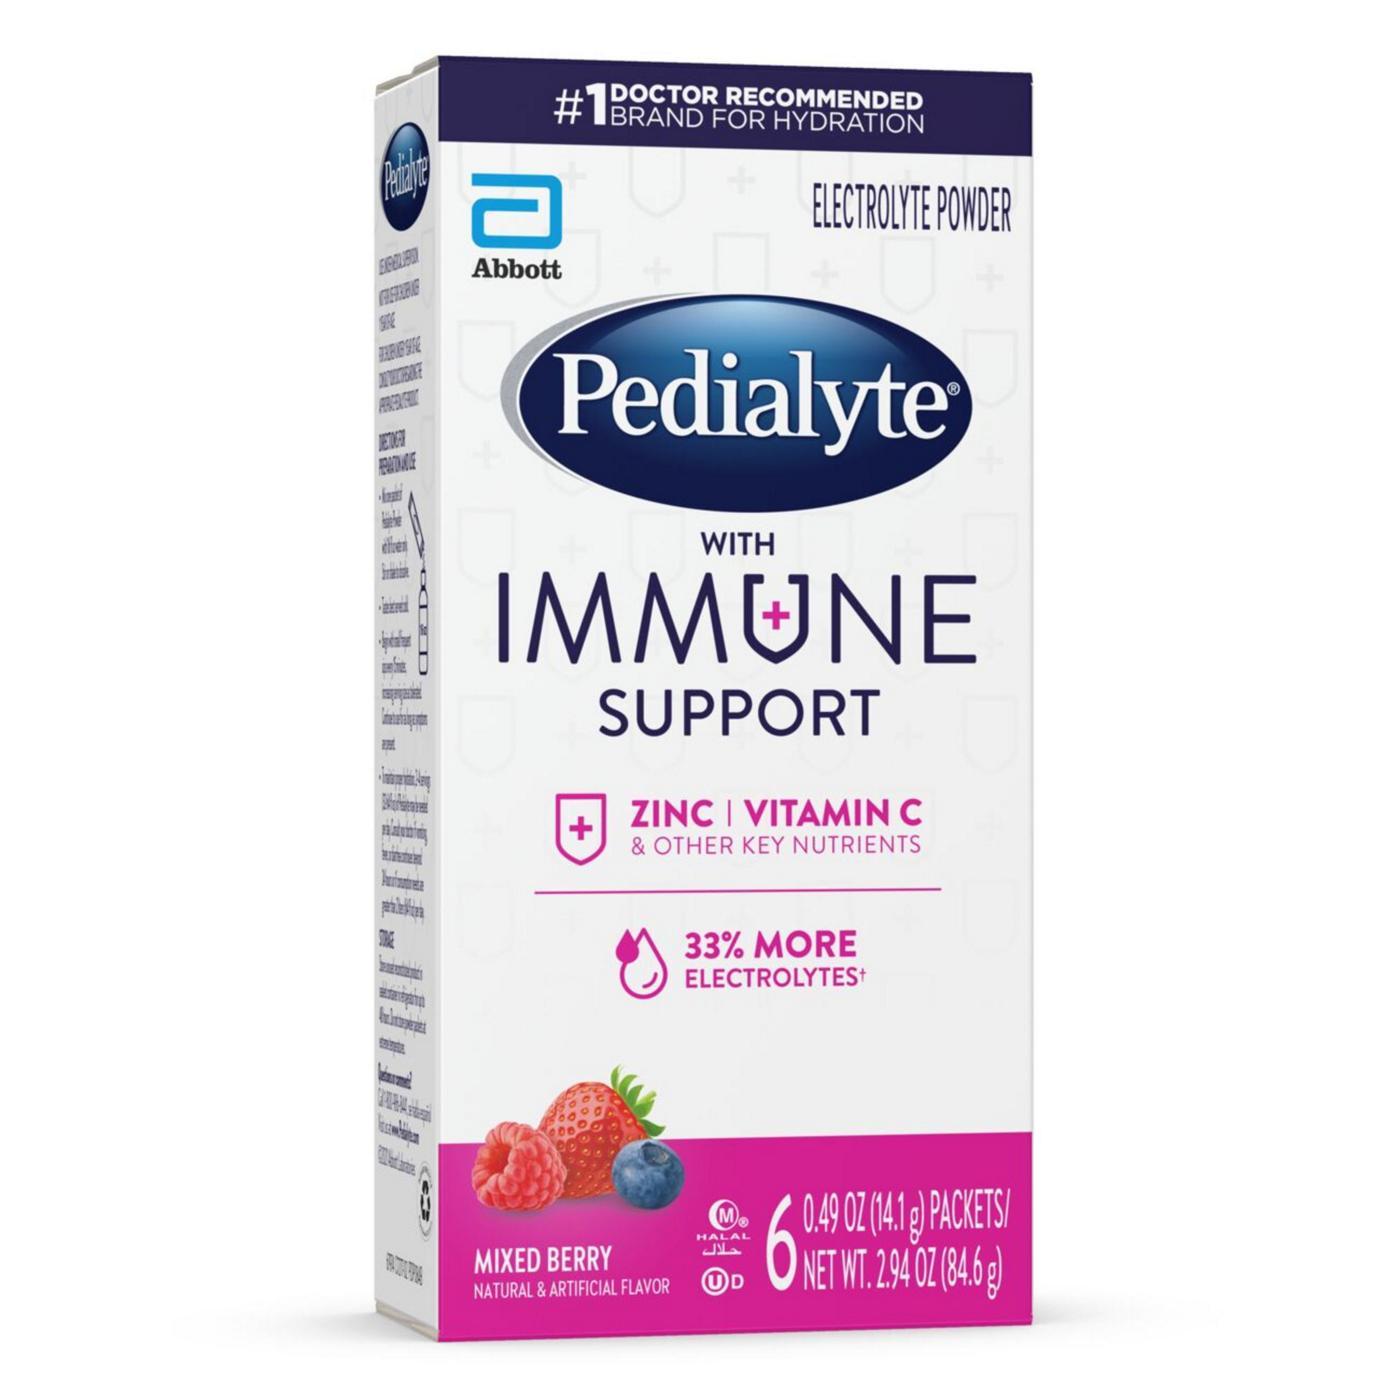 Pedialyte with Immune Support Electrolyte Powder Packs - Mixed Berry; image 7 of 7